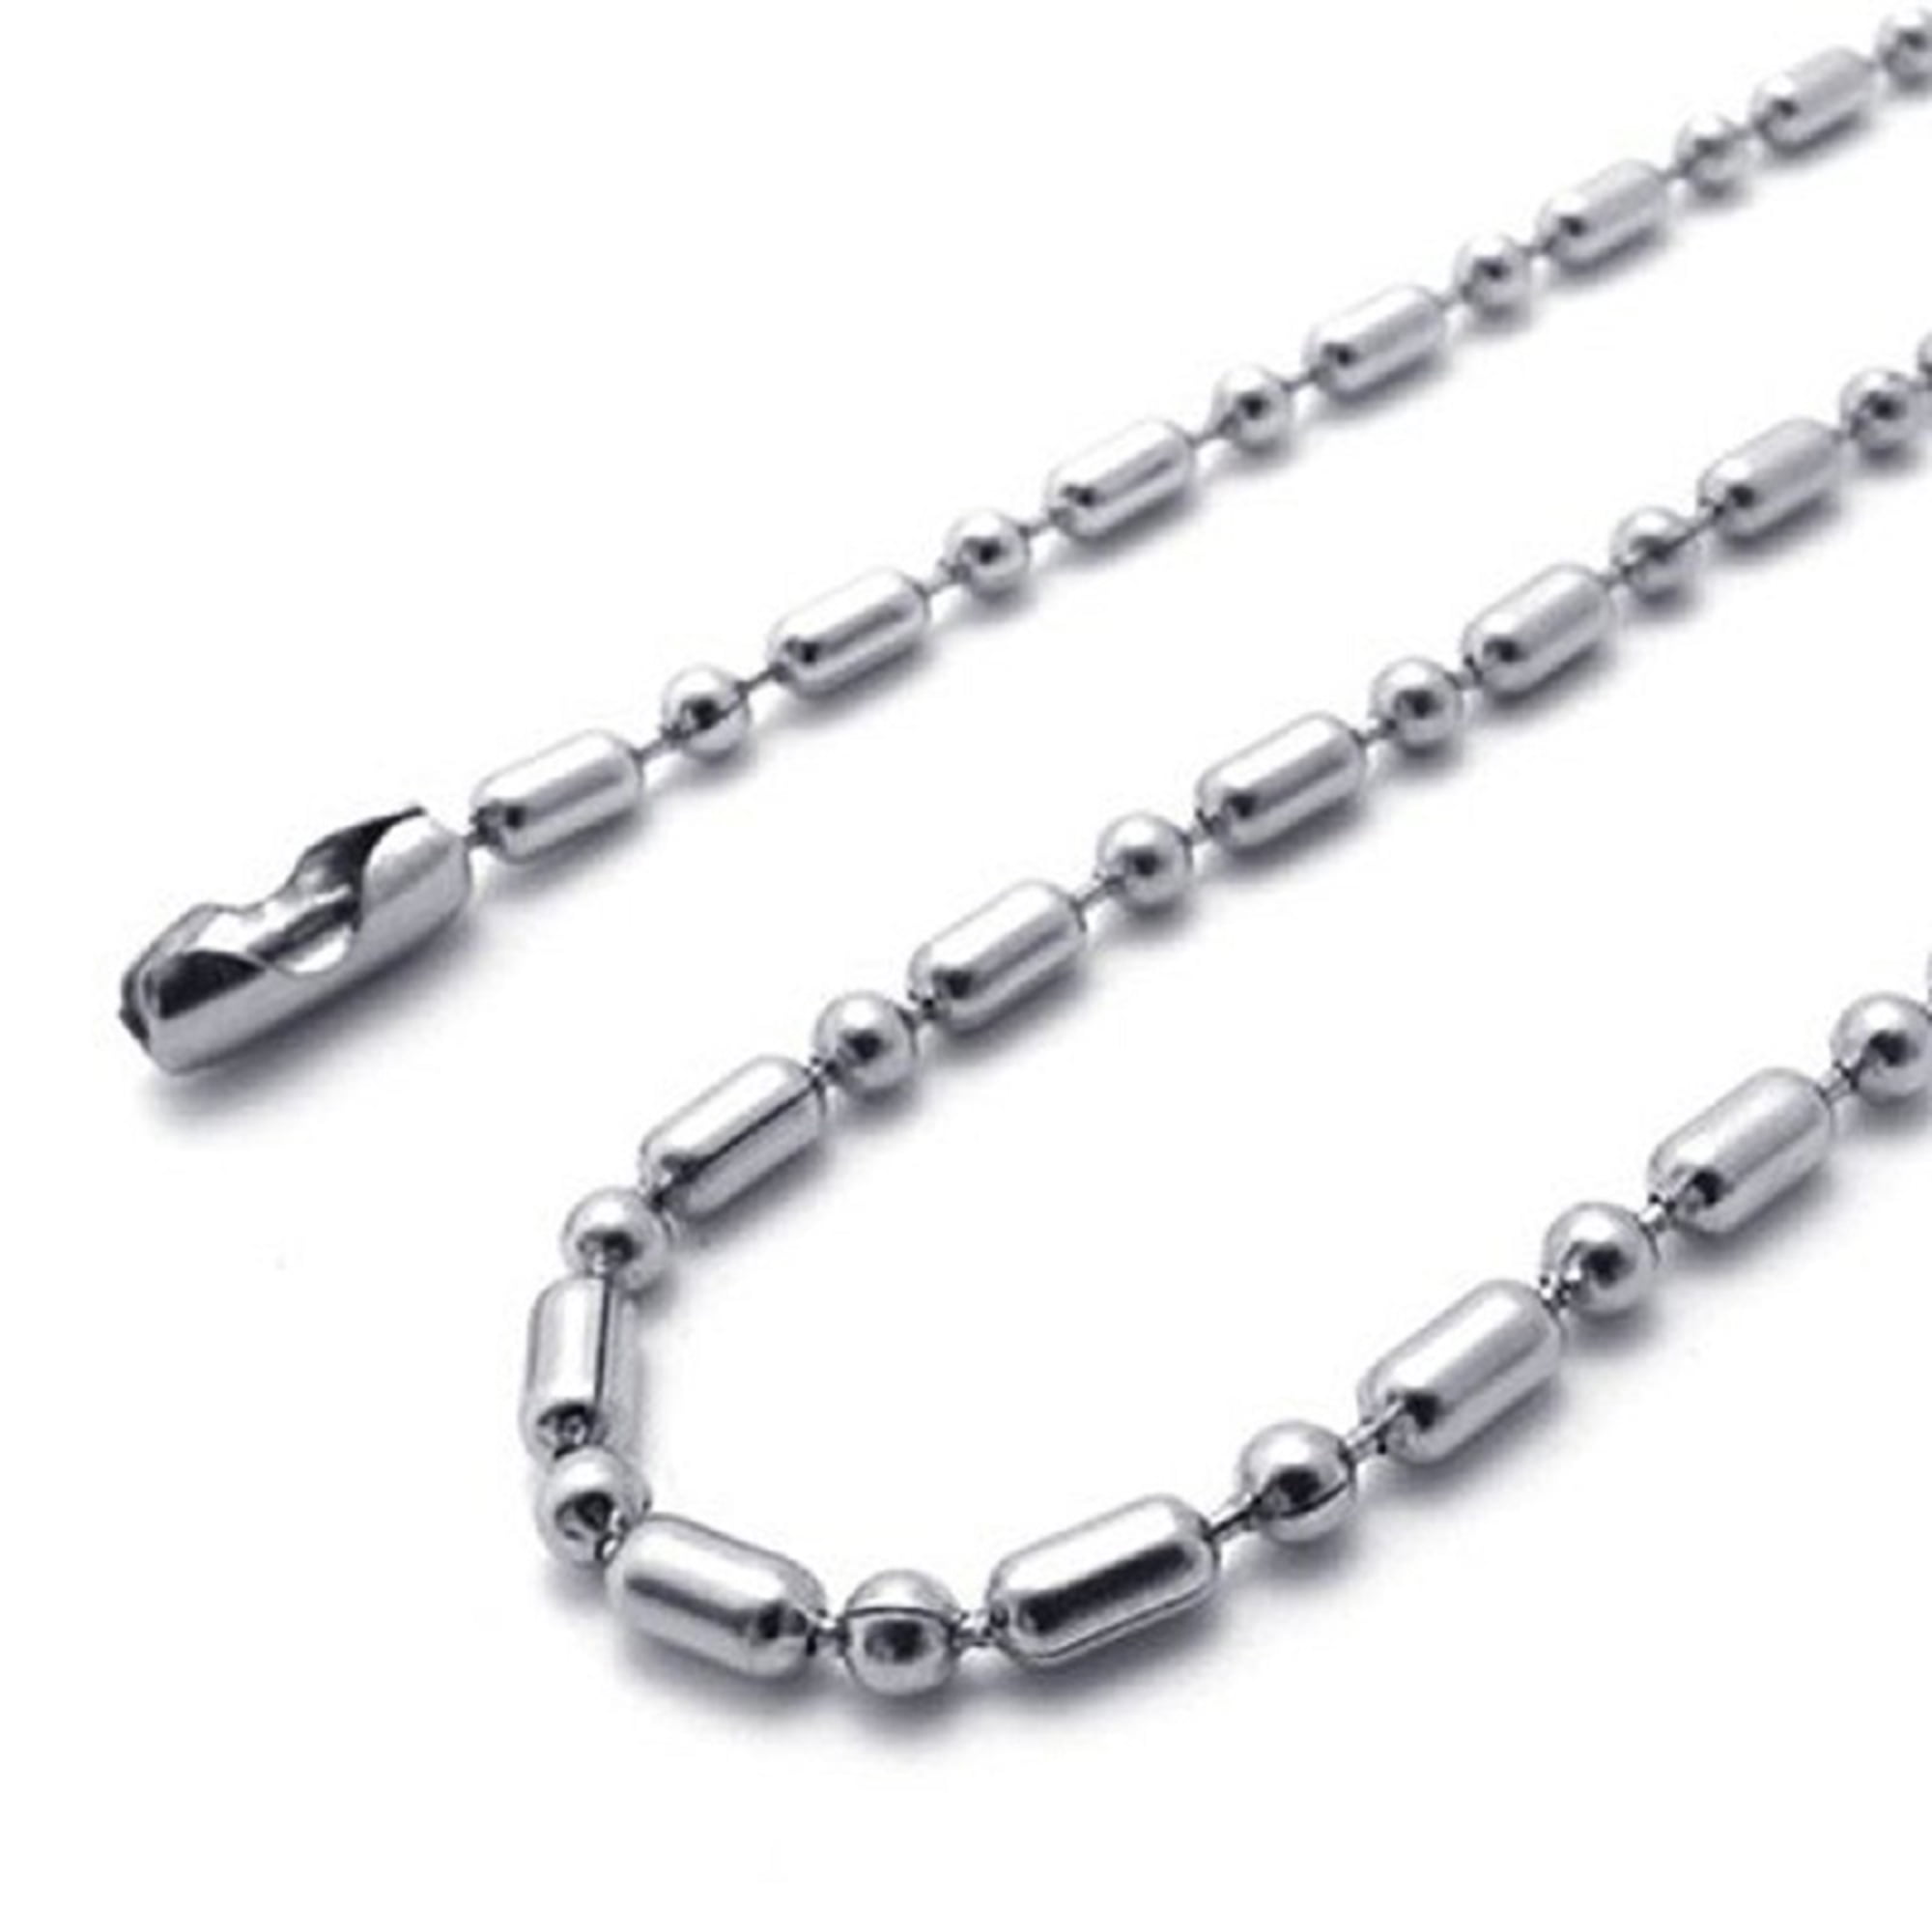 SANDRA Mens Jewelry 2.4 mm 16-40 Silver Stainless Steel Ball & Oval Bead Necklace Chain 